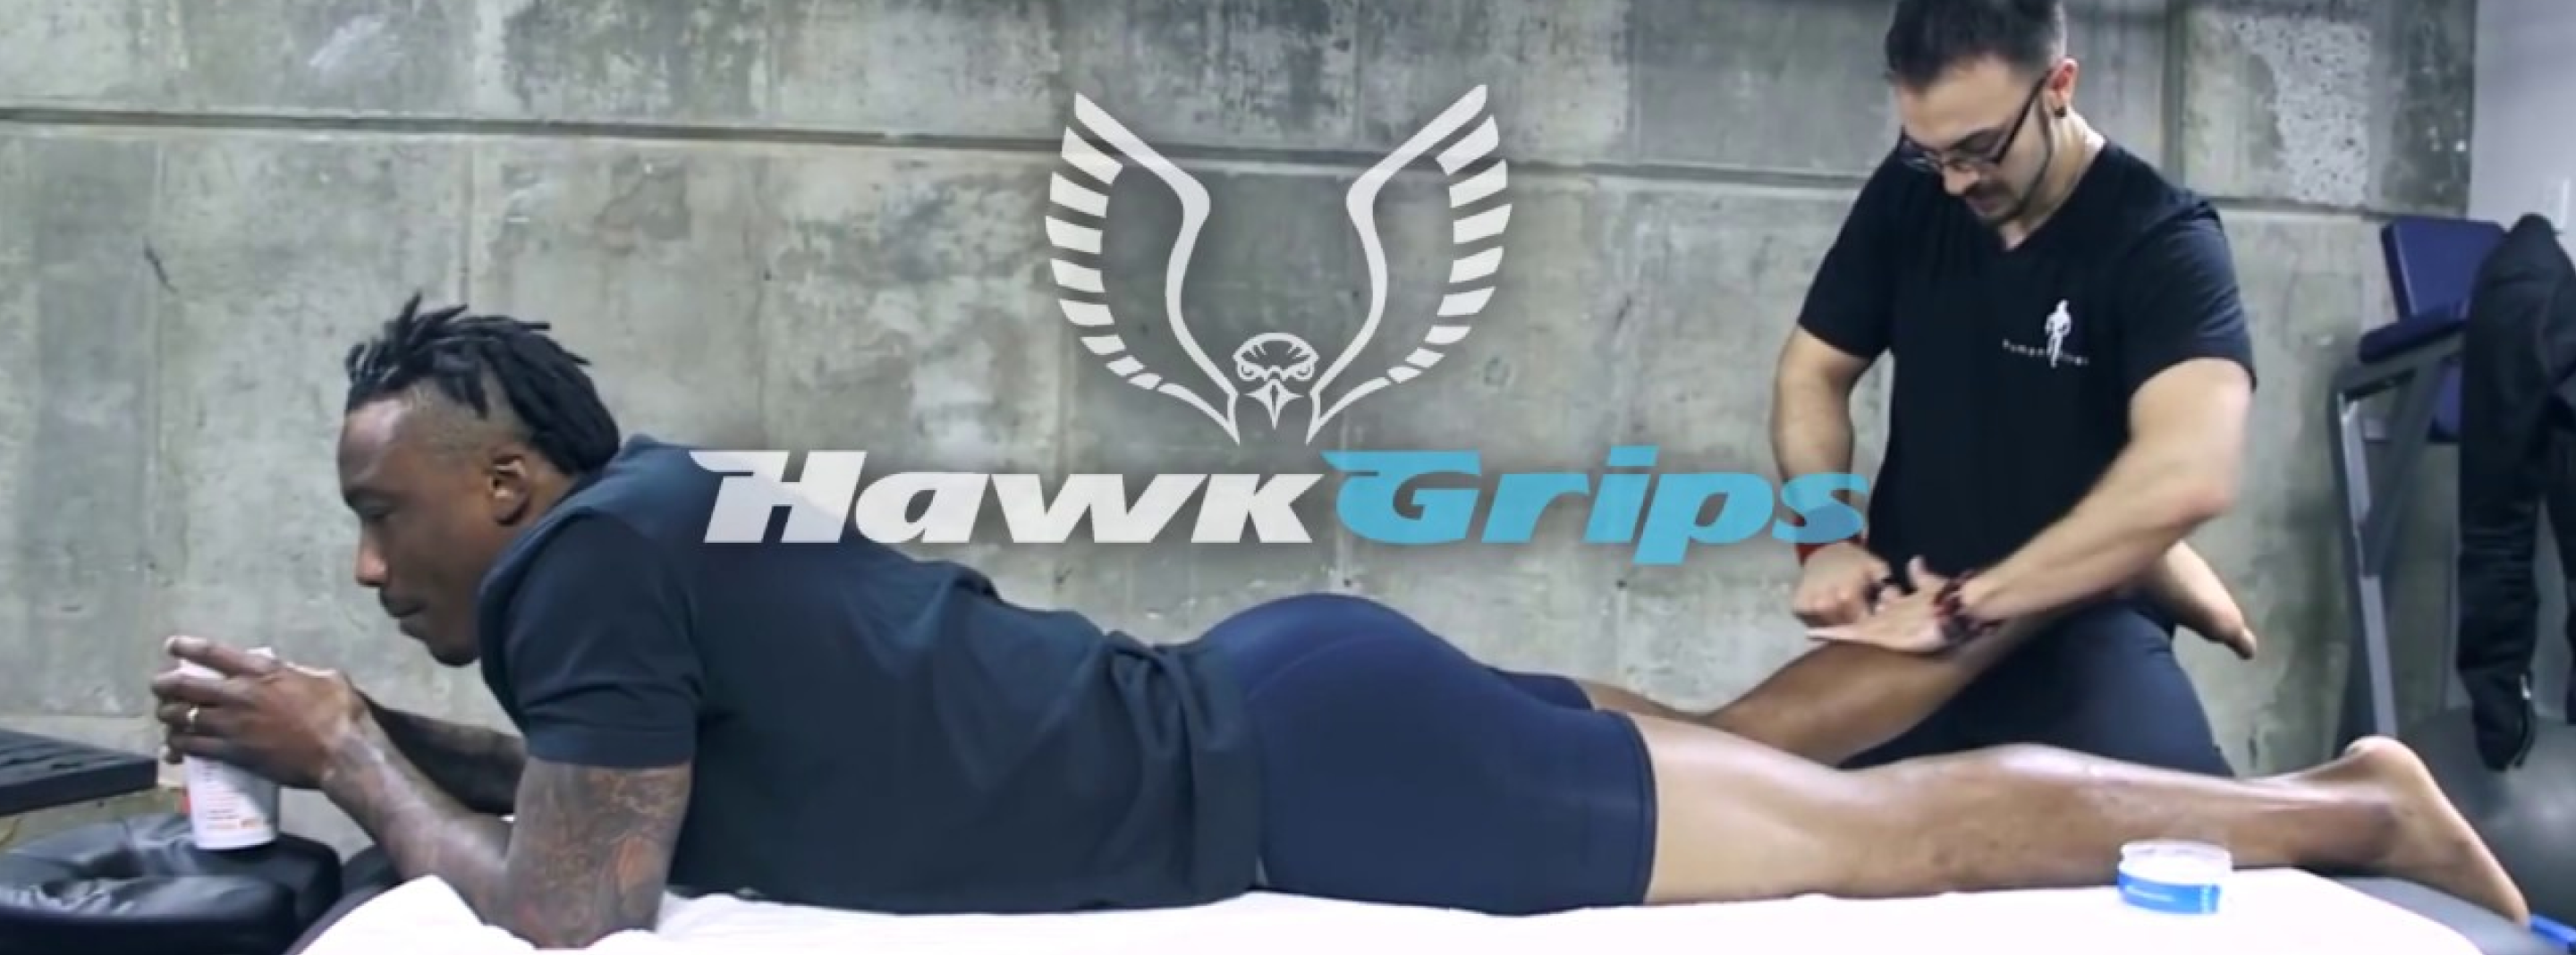 Load video: WHy HawkGrips?